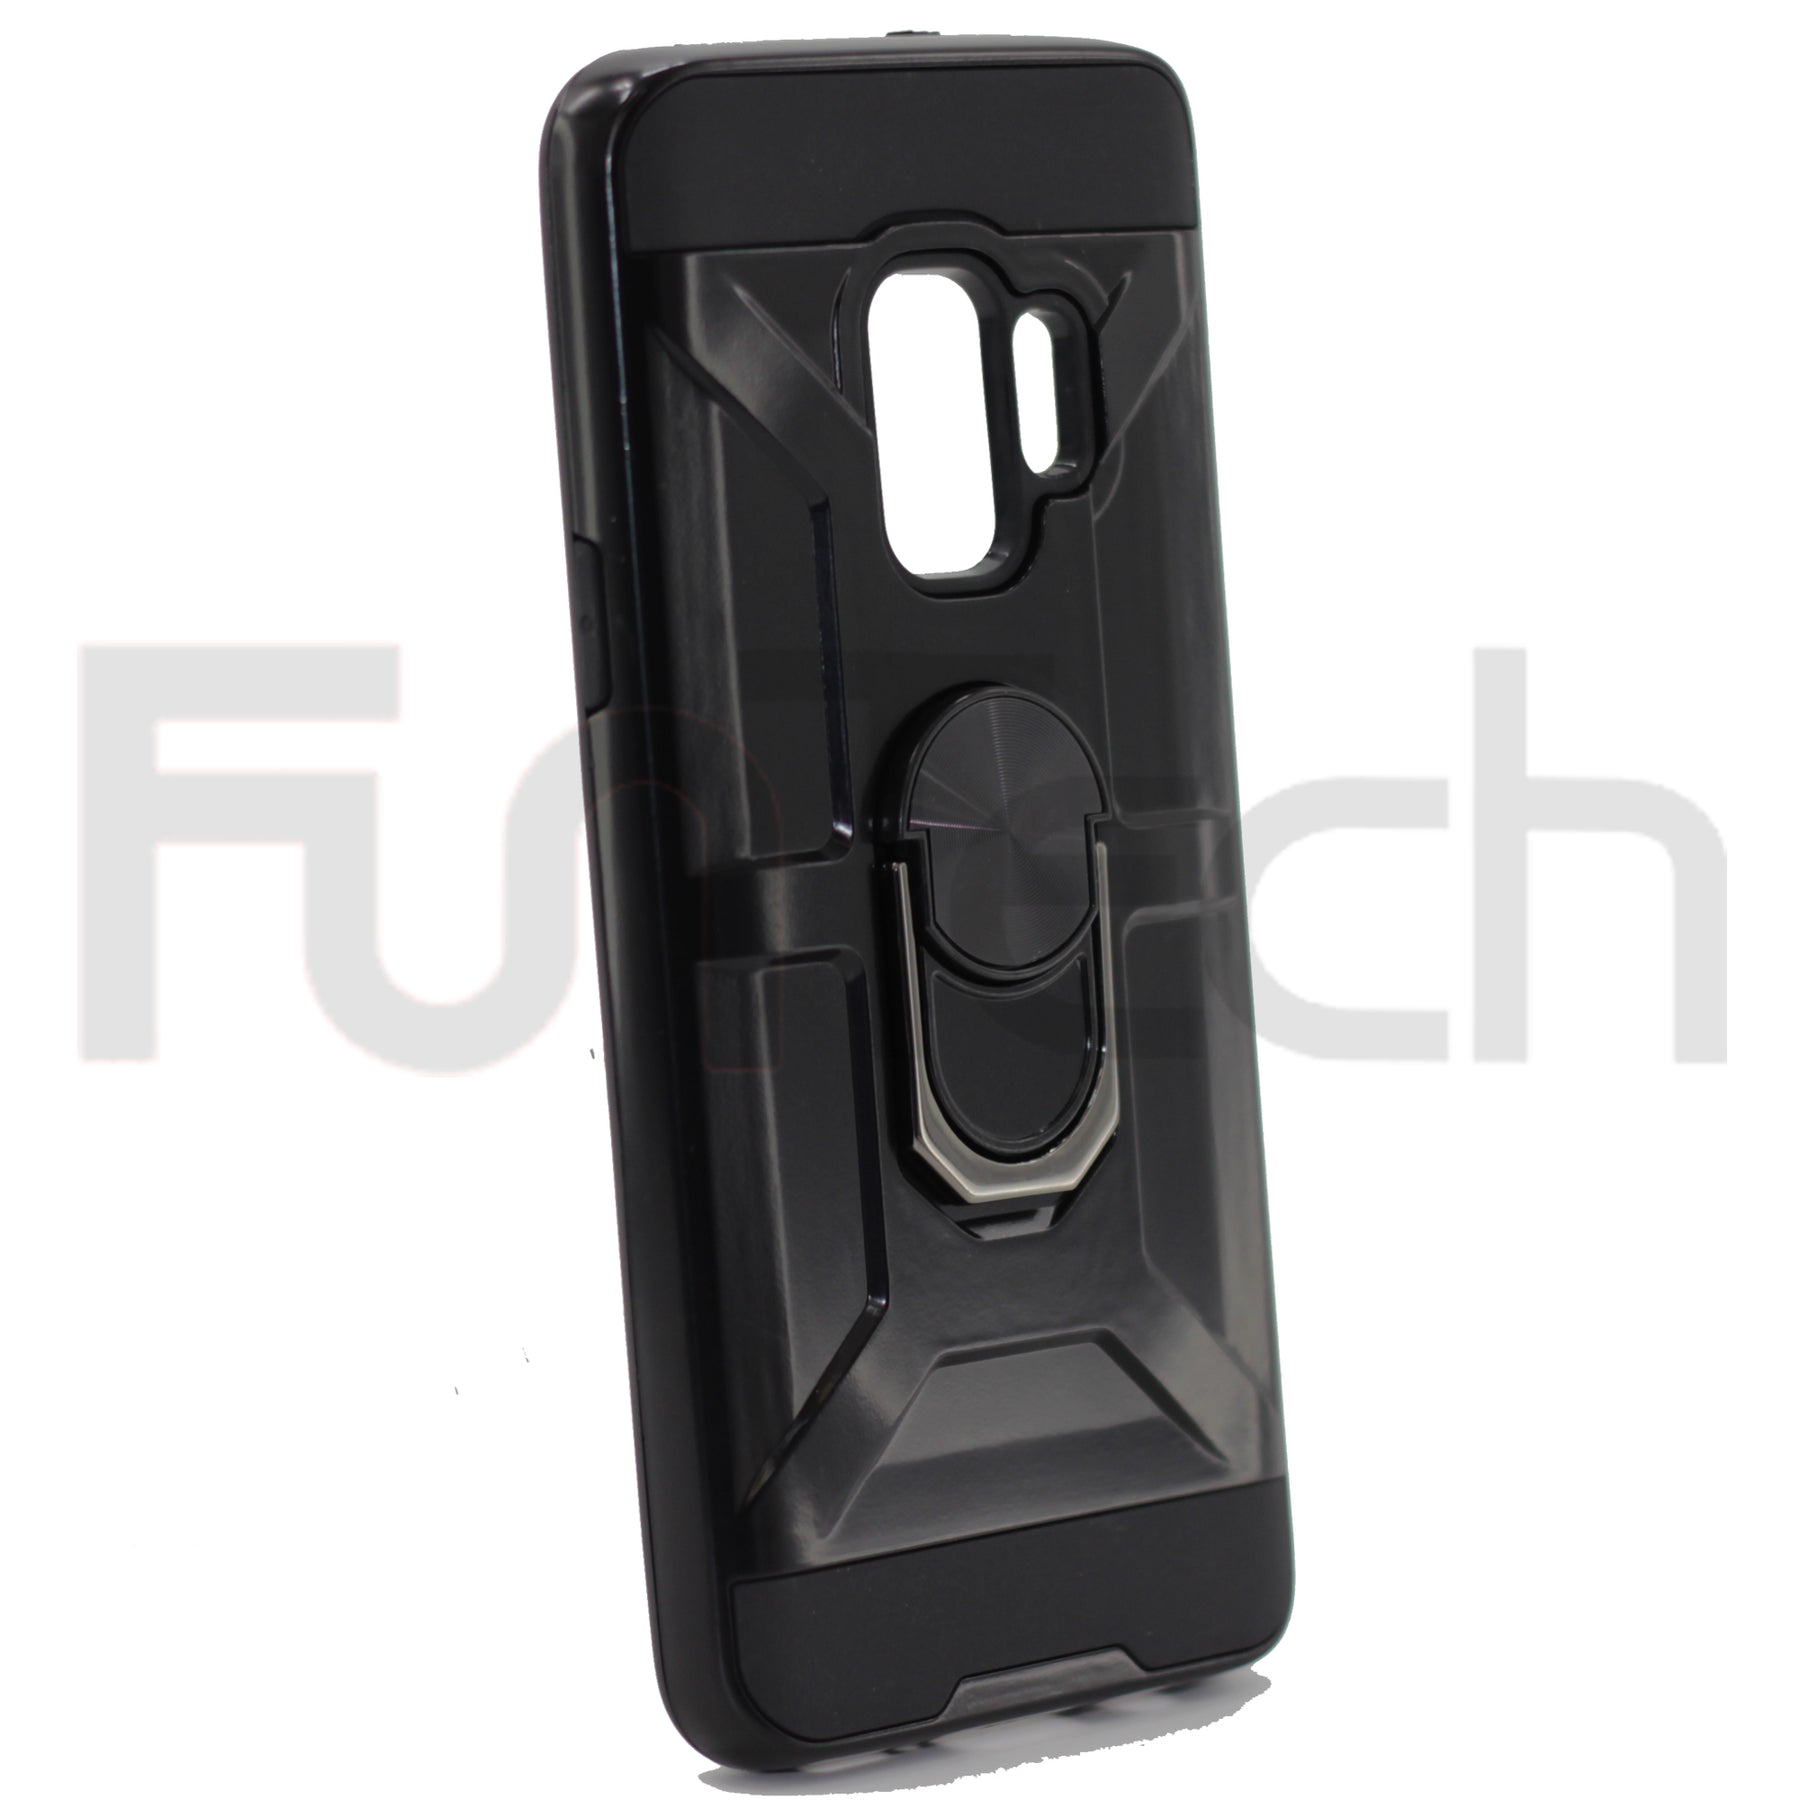 iPhone Cases, Samsung Cases, iPad Cases, Oppo Phone Cases, Xiaomi Phone Cases, Tab Cases, IOT, Home Electronic, Gadgets, Ireland iPhone, Dublin Samsung, Computer Gadgets, Phone Accessories, Phone Cover Cases, Telephone Repair, Smart Devices, IOT, Drop & Shock Proof Cases, Dublin, Galway, Cork, Walkinstown, Clondalkin, Tallaght, Athlone, County Dublin, 